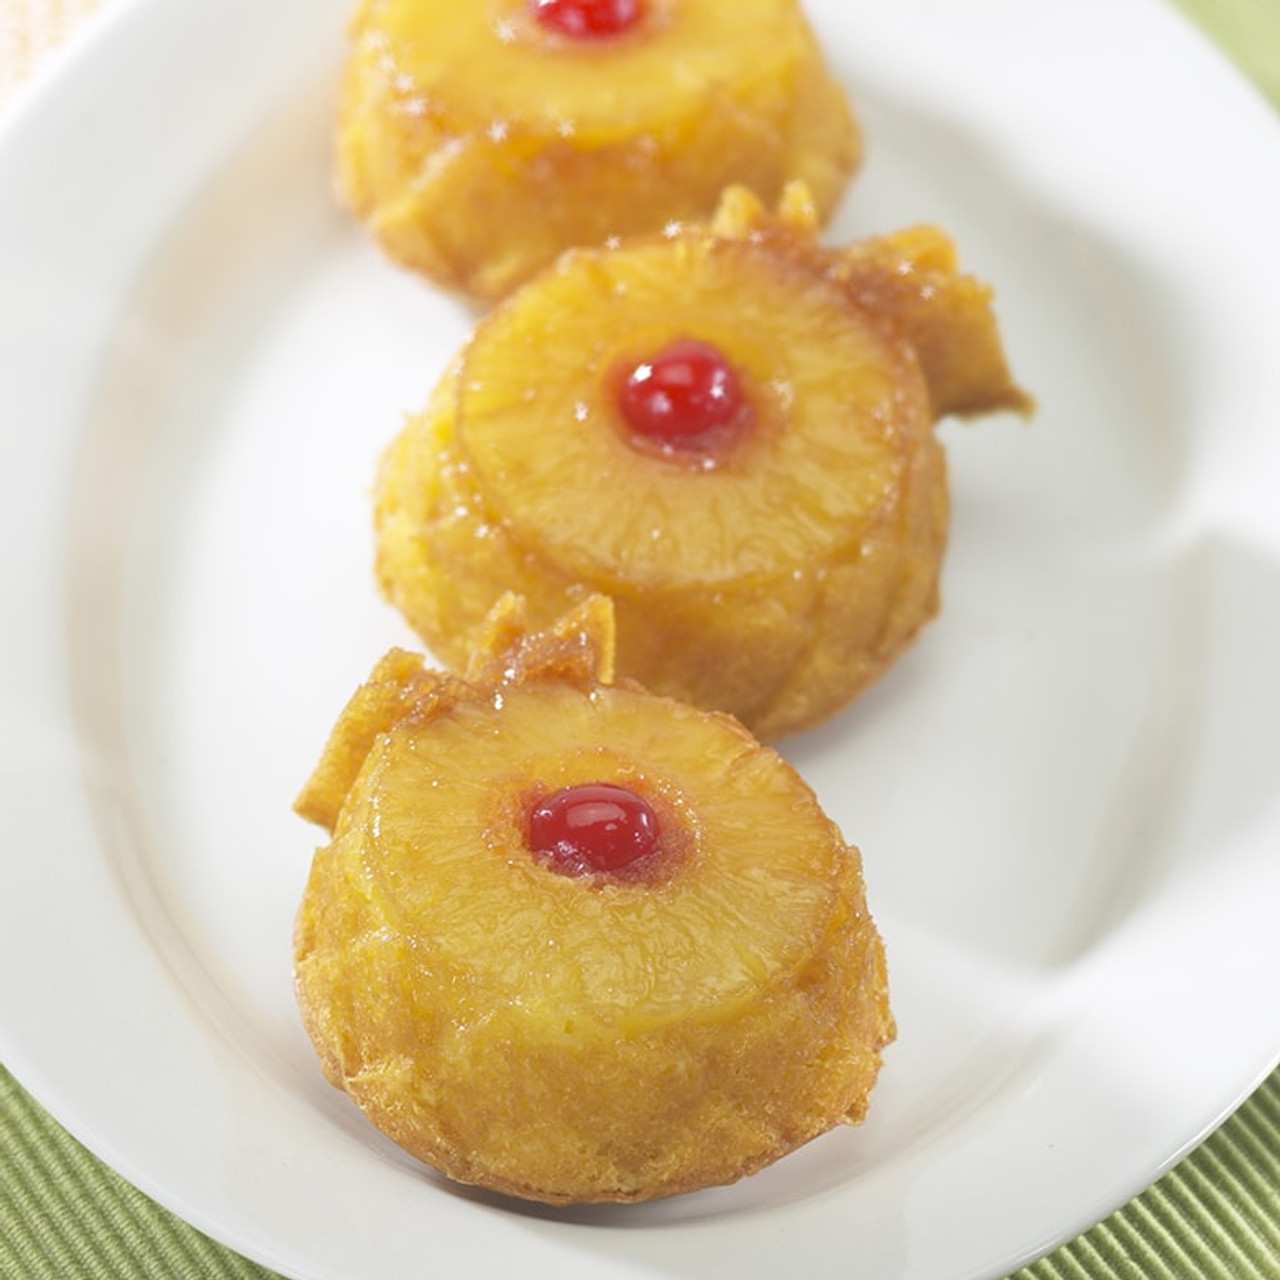 https://cdn11.bigcommerce.com/s-hccytny0od/images/stencil/1280x1280/products/757/3871/nordic-ware-pineapple-upside-down-mini-cake-pan-2__92973.1514548308.jpg?c=2?imbypass=on